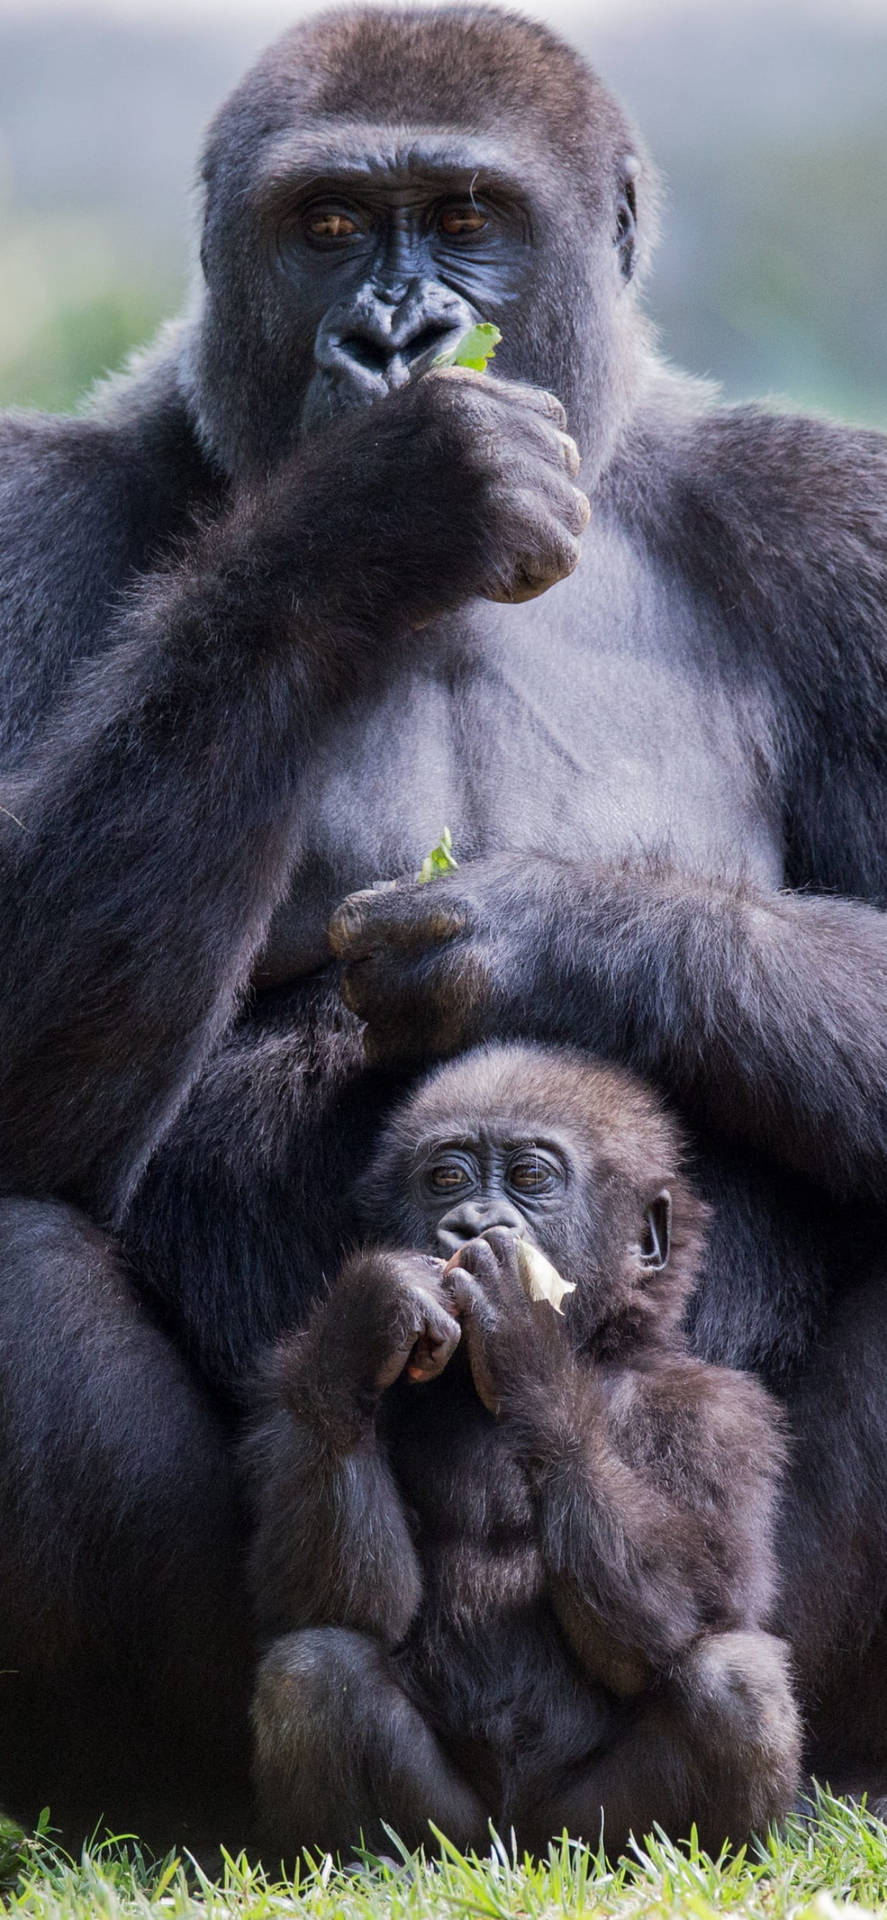 Eating Mother And Infant Gorilla Iphone Background